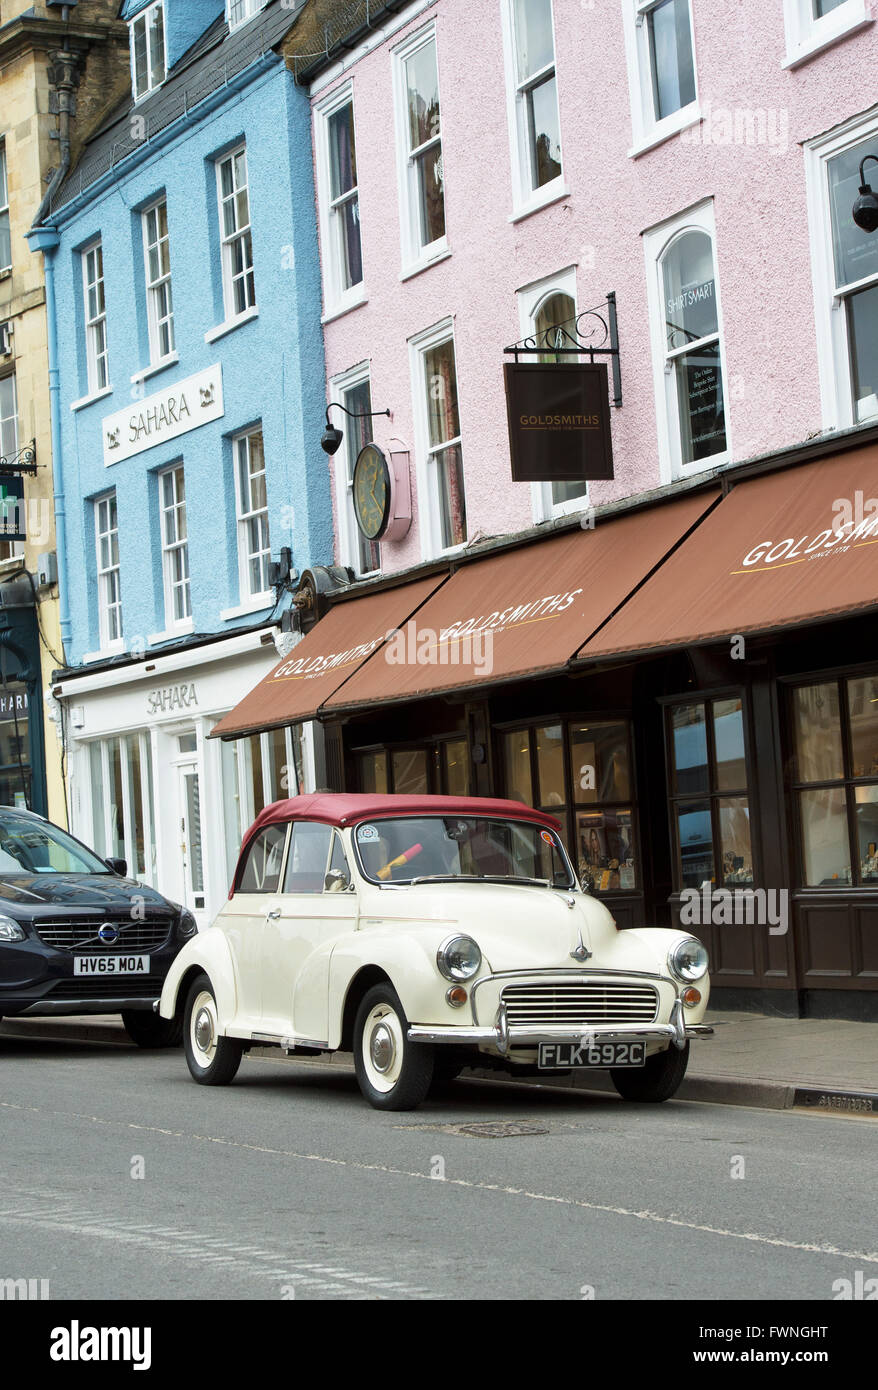 1965 Morris Minor 1000 Convertible car parked on Cirencester high street. Cotswolds, Gloucestershire, England Stock Photo